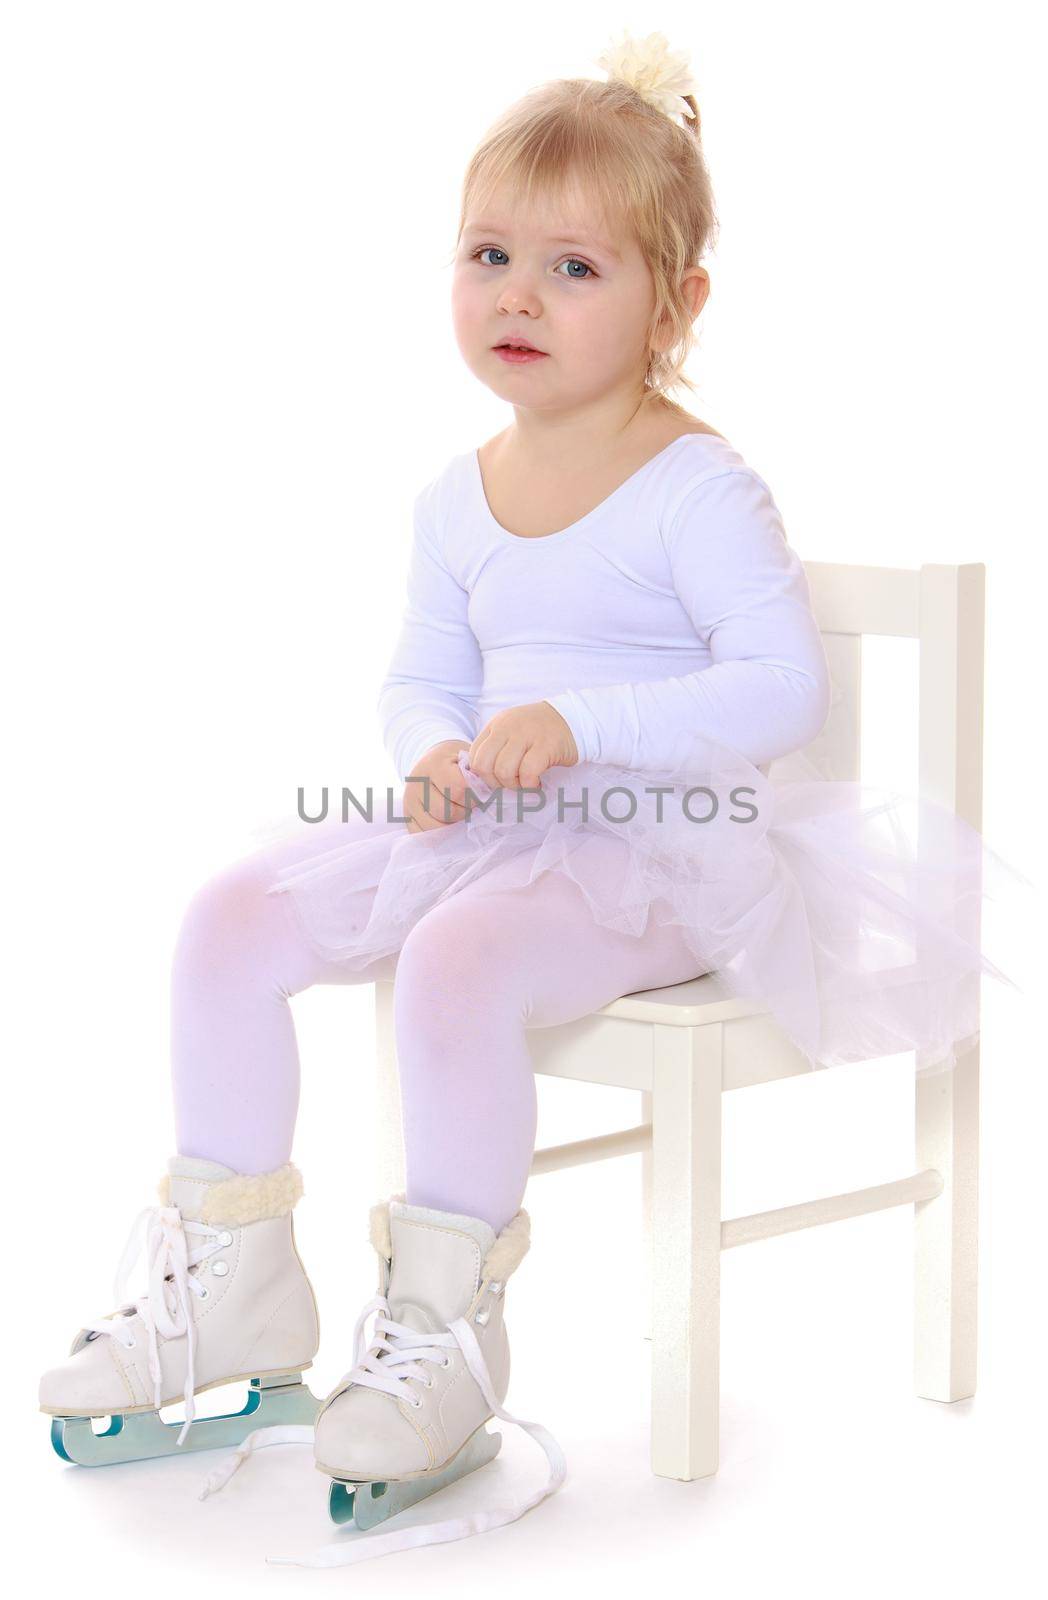 Cute little girl , a future figure skater, sits on a chair in a White sports dress and figure skates on two skids-Isolated on white background